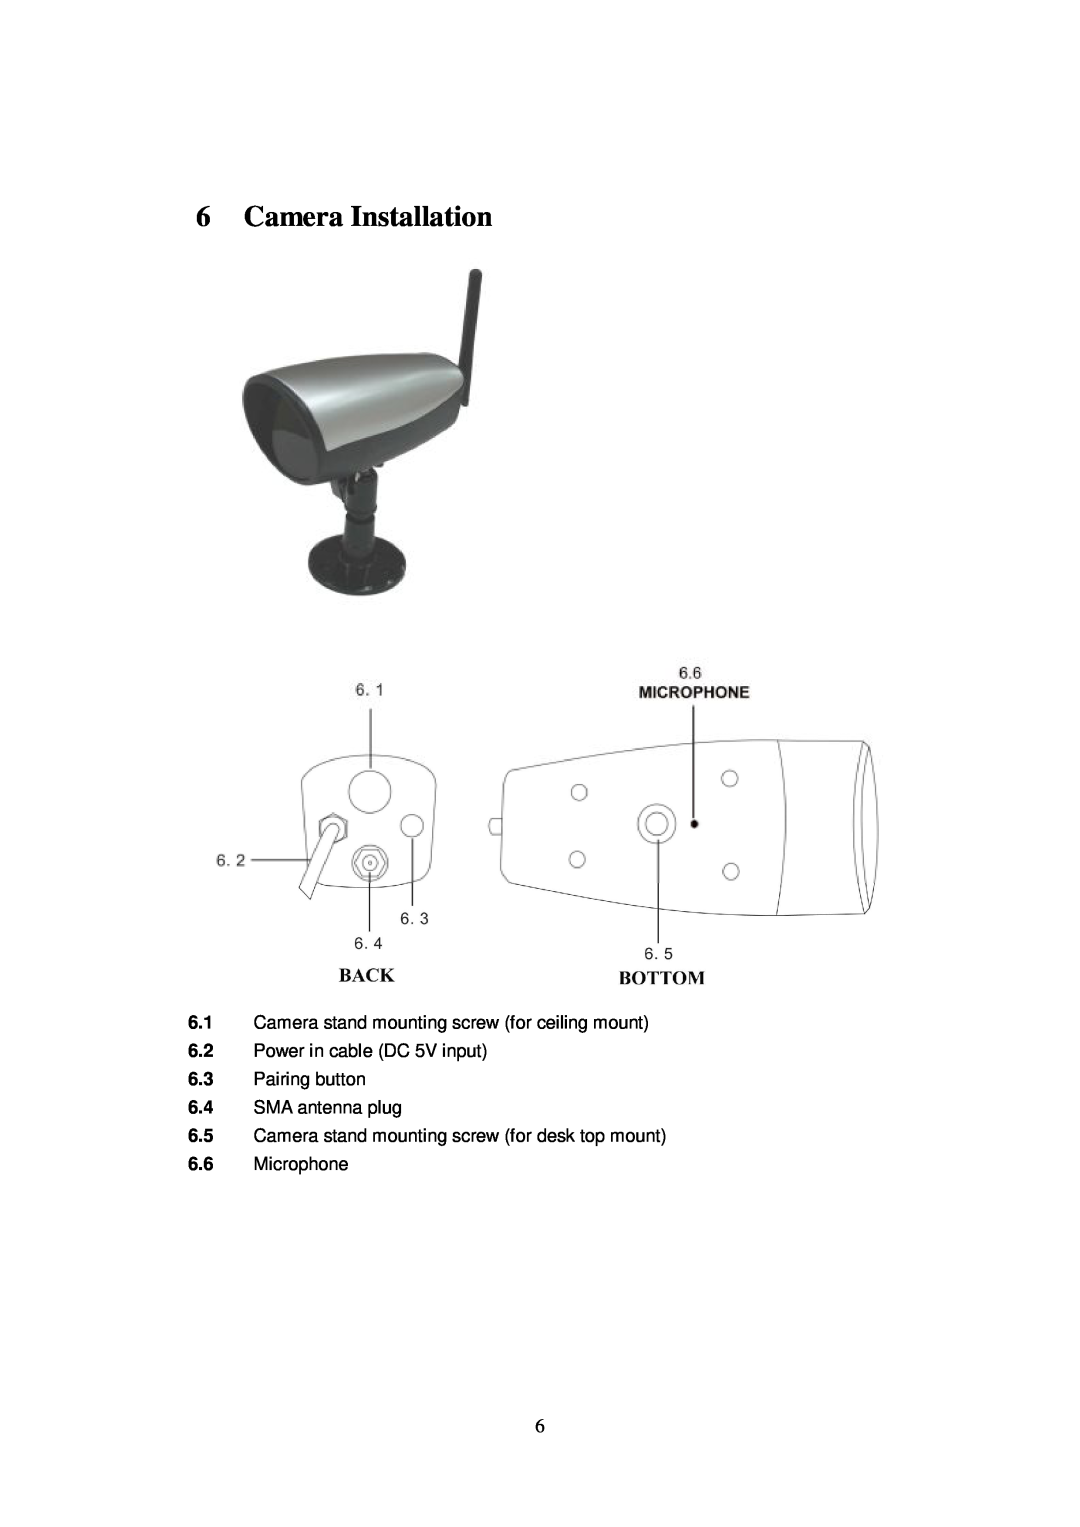 Q-See QSDT404C Camera Installation, 6.1Camera stand mounting screw for ceiling mount, 6.4SMA antenna plug, 6.6Microphone 